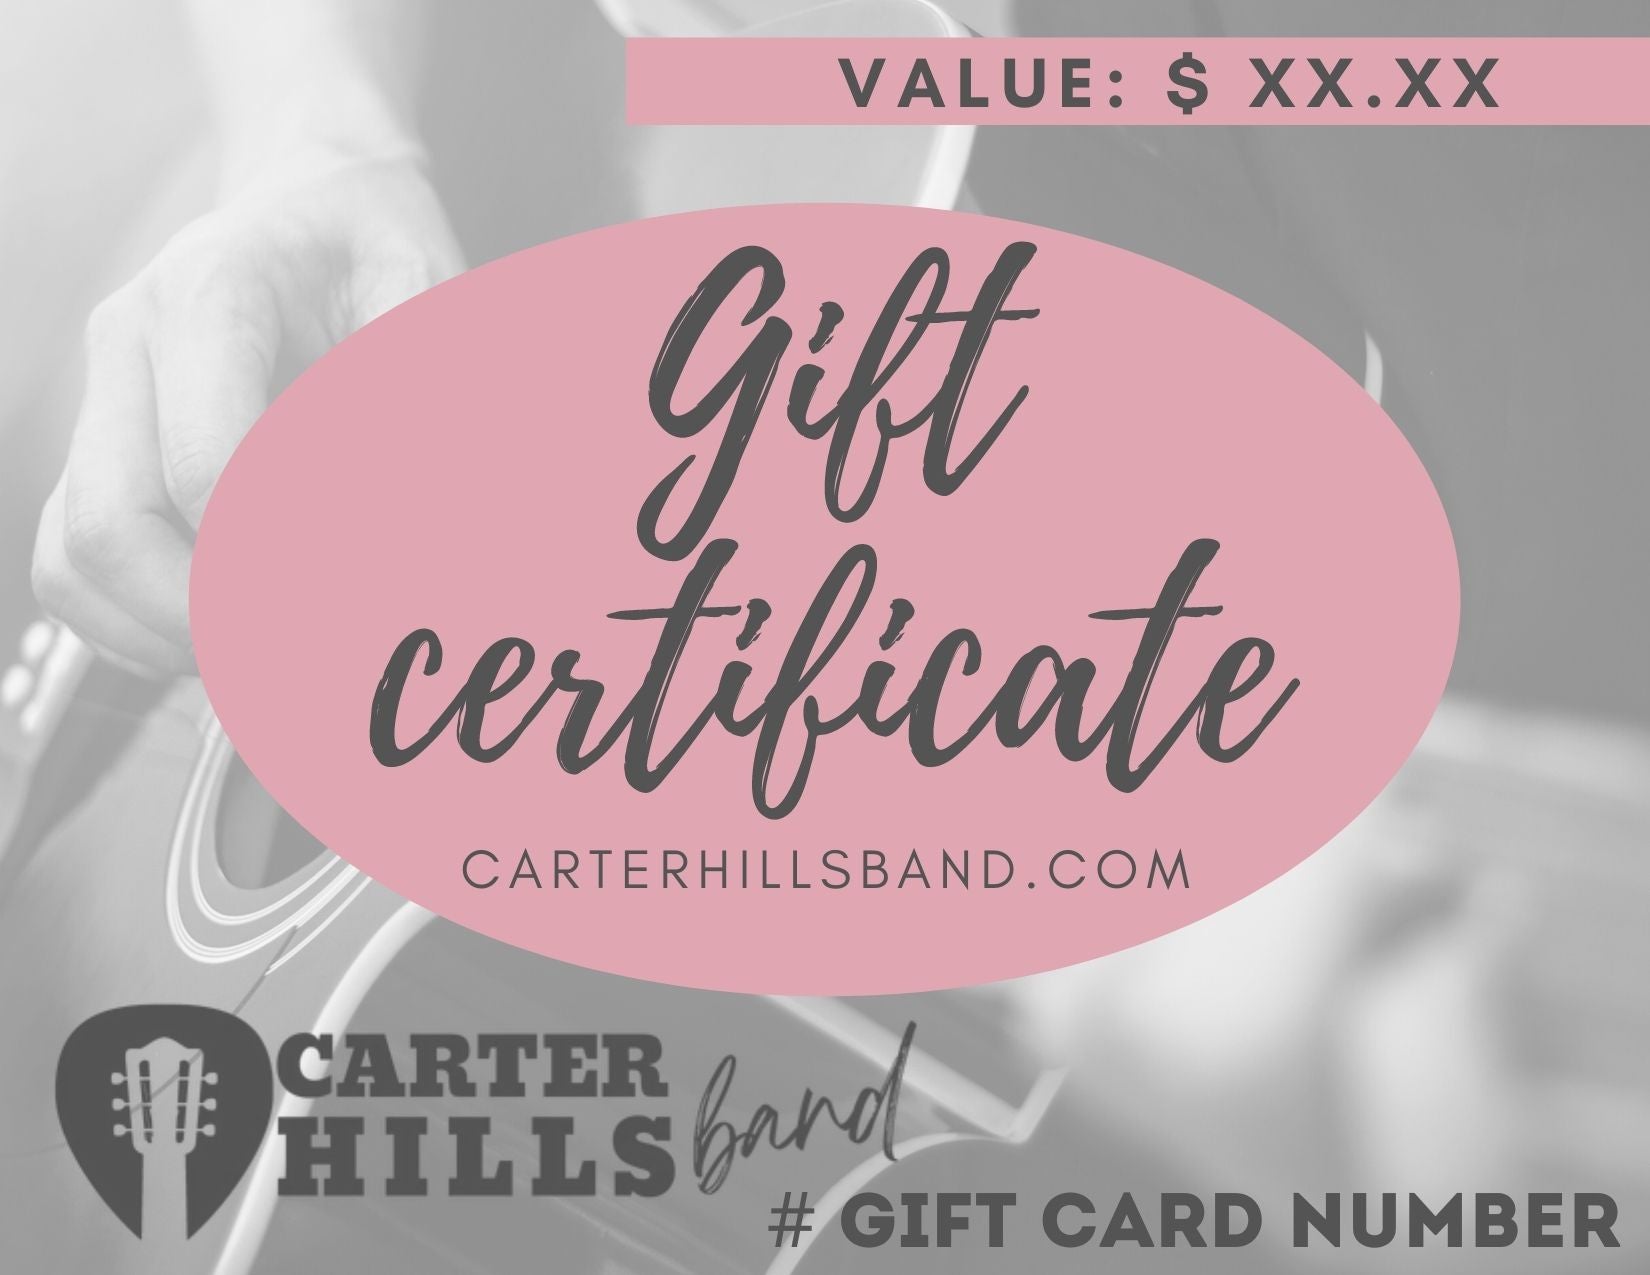 Carter Hills Band Gift Cards